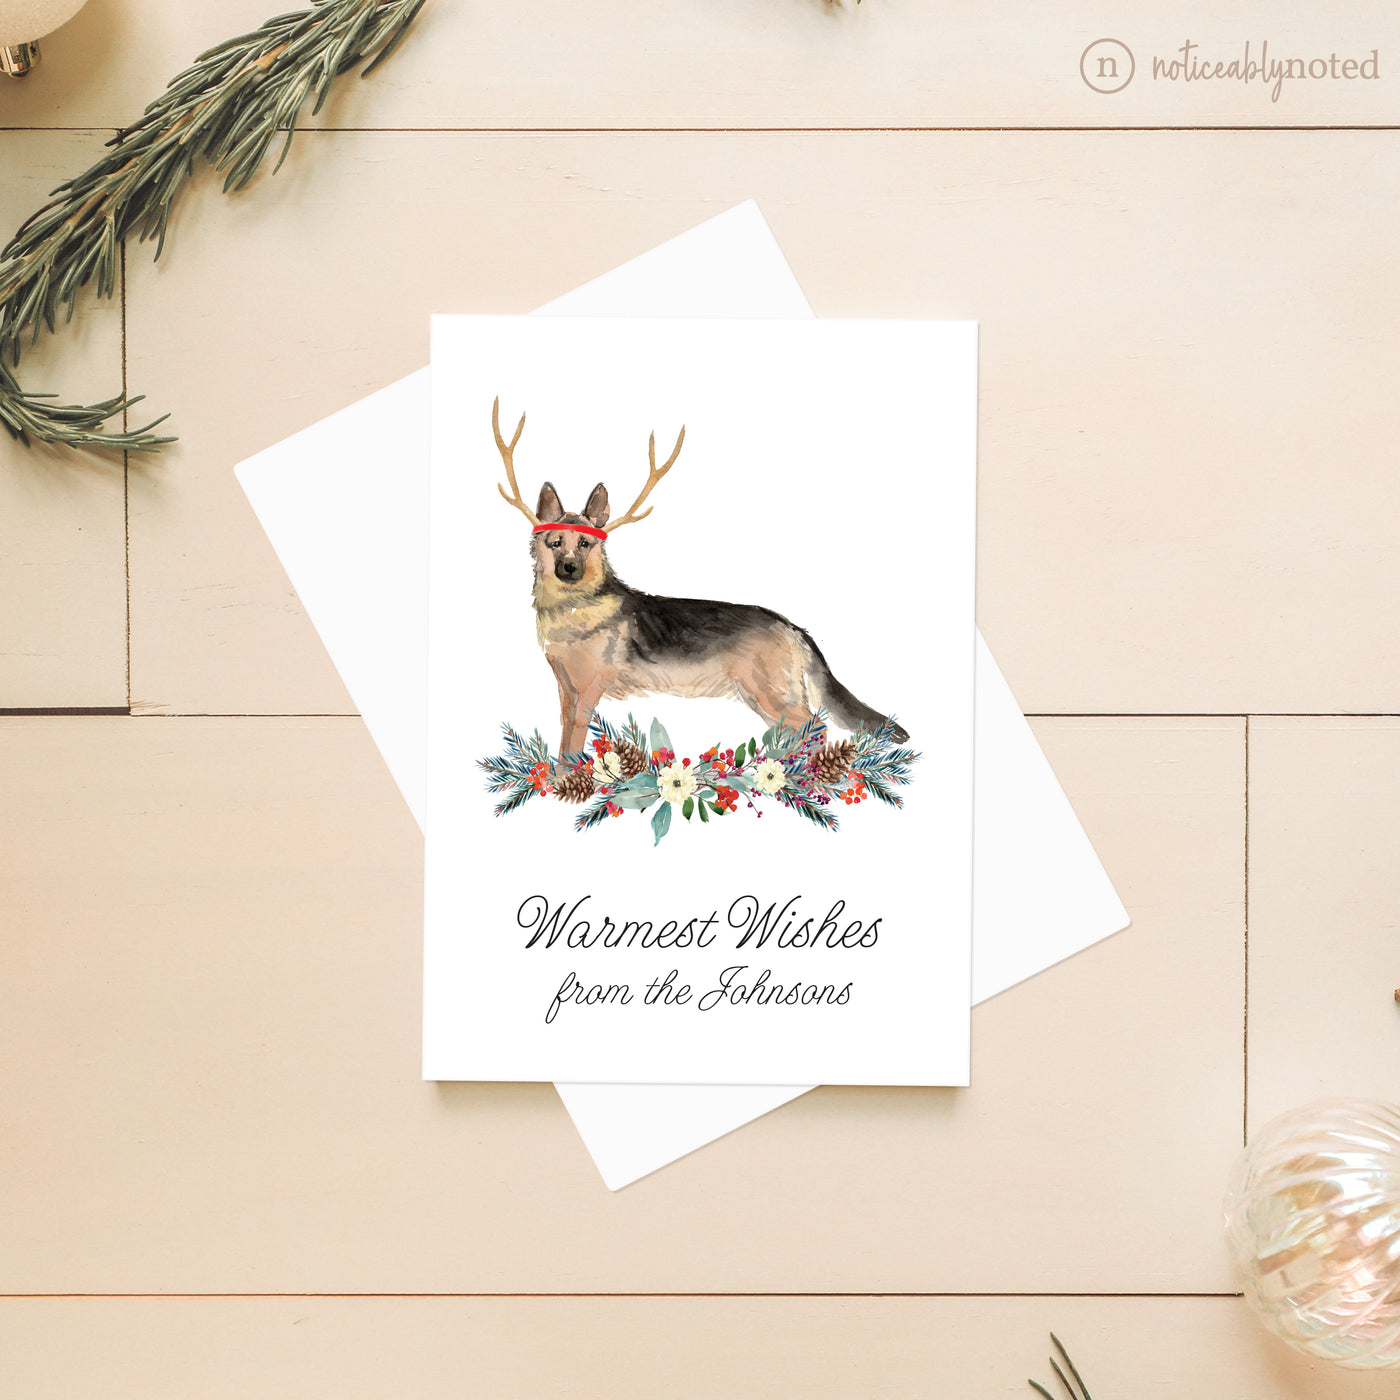 German Shepherd Dog Holiday Card | Noticeably Noted